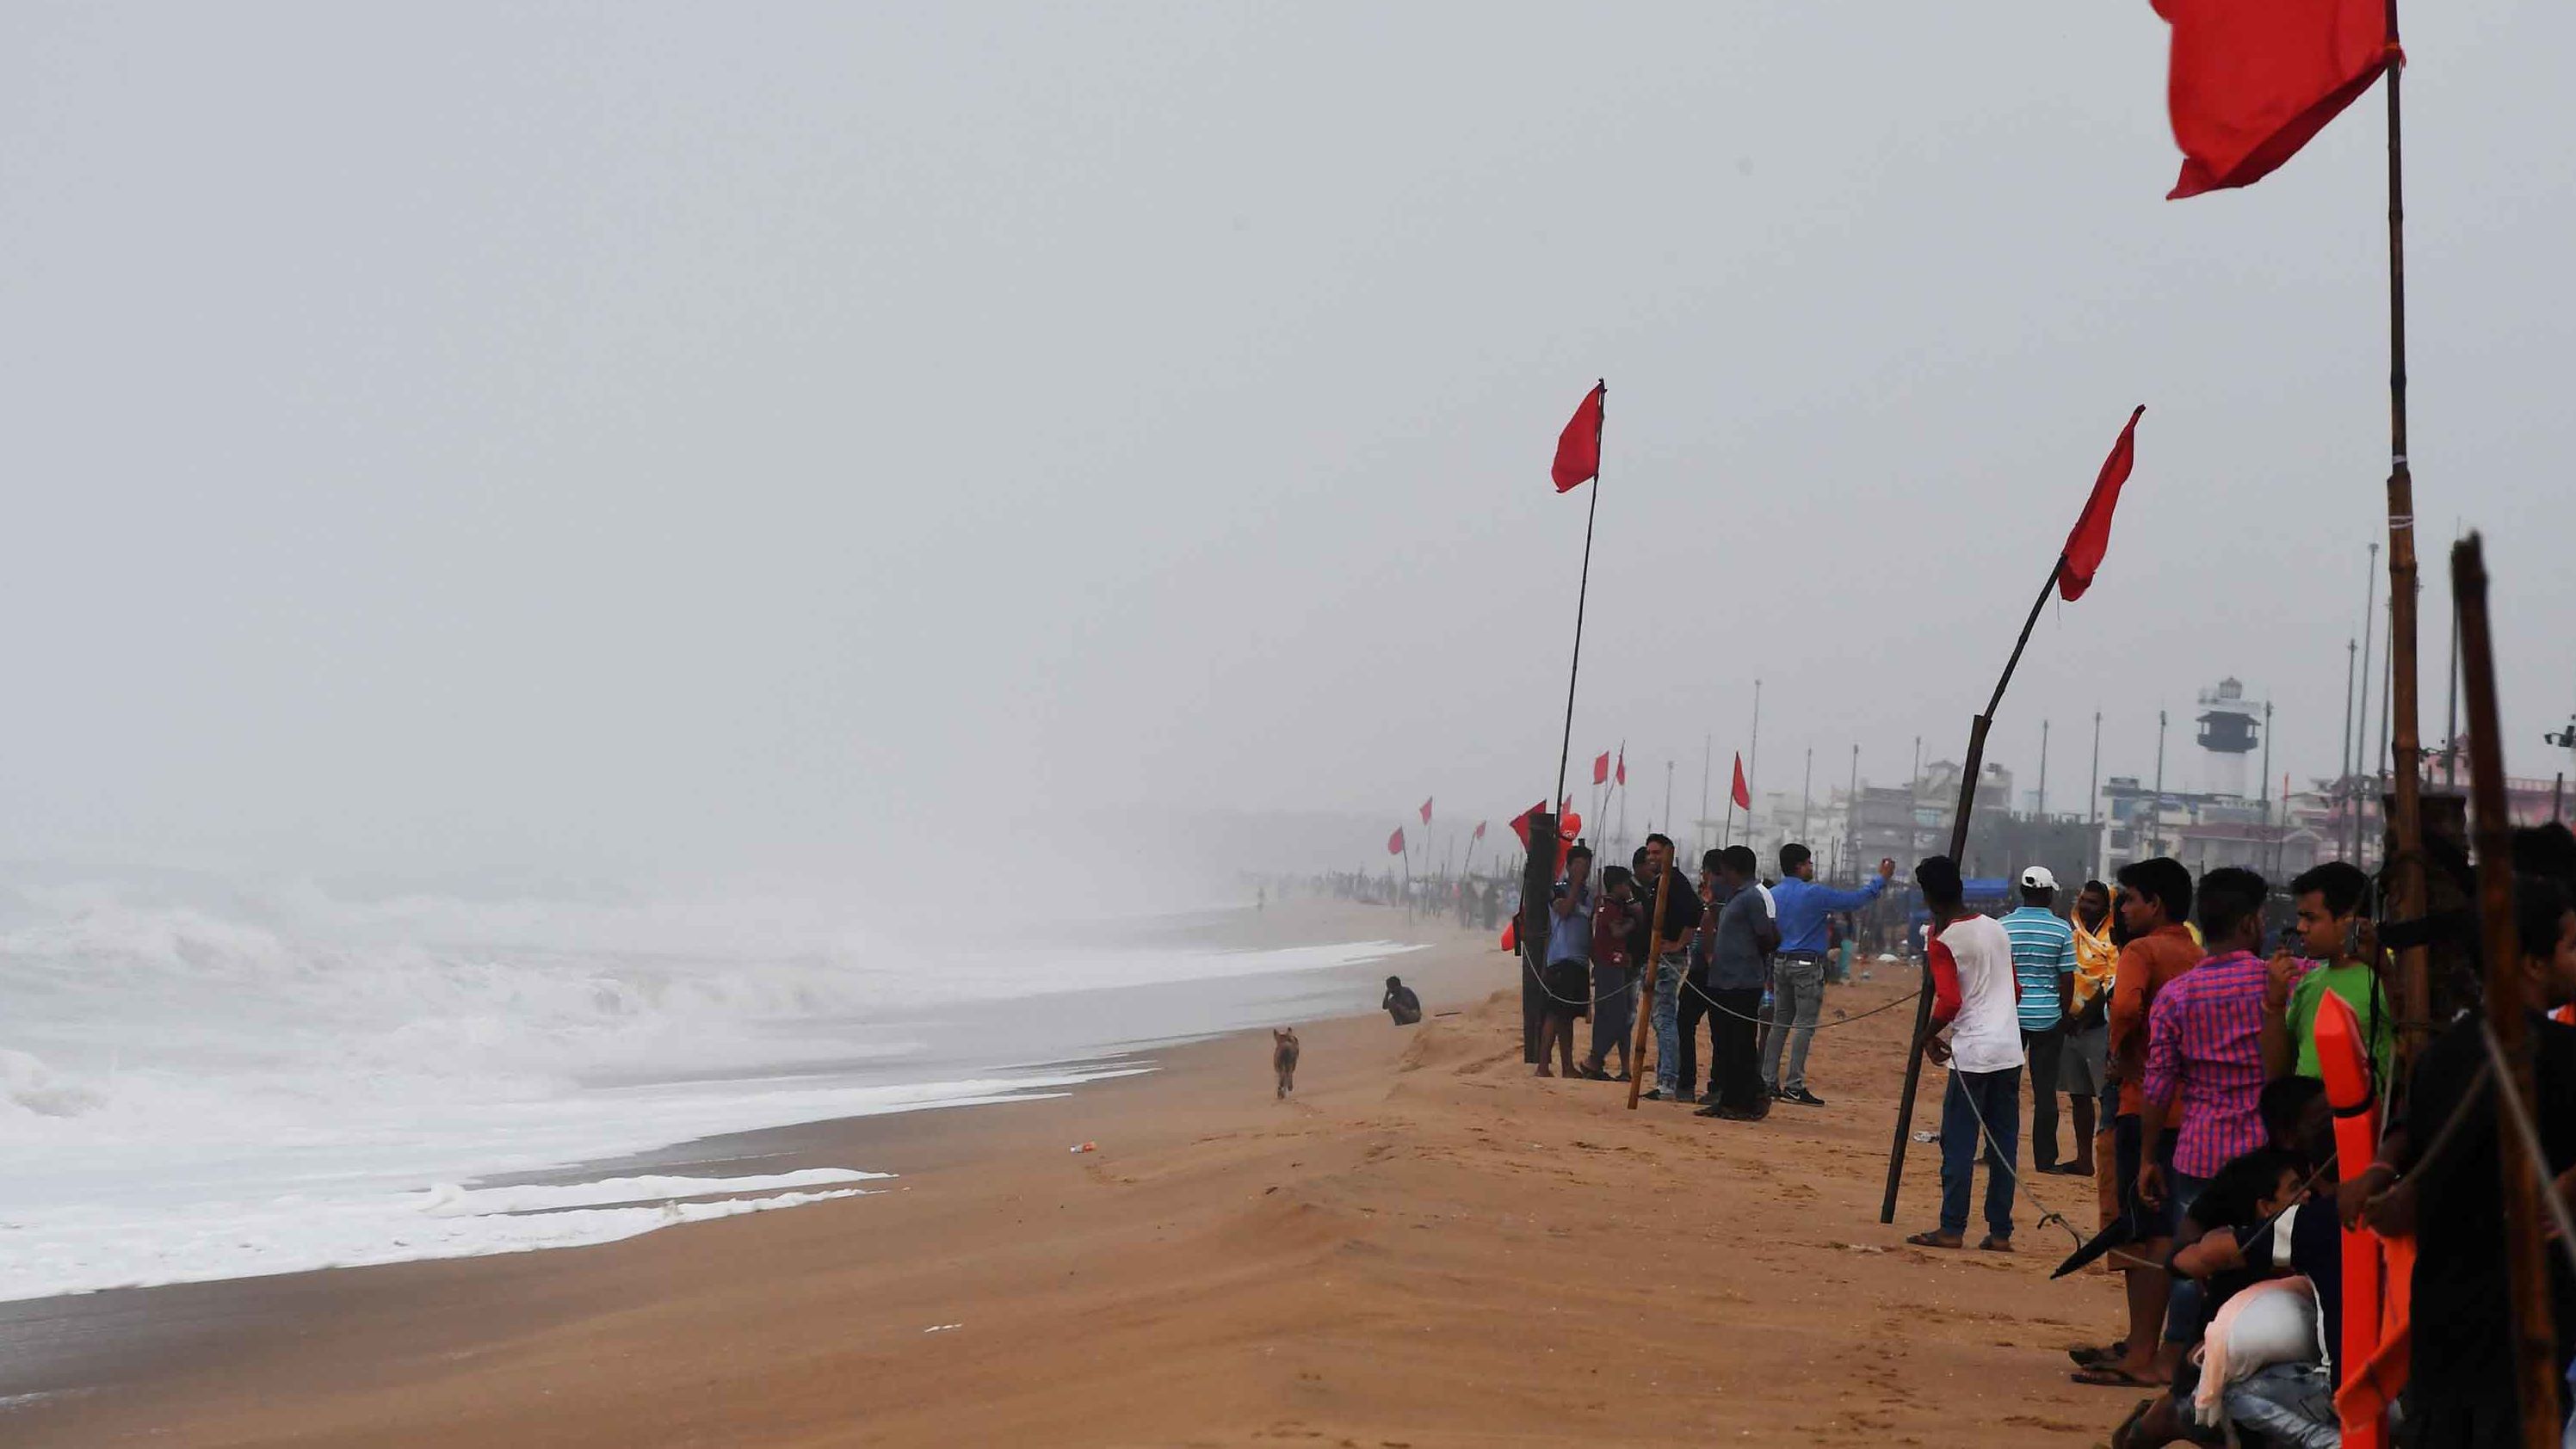 People view the turbulent sea from a closed beach in Puri on Thursday, May 2.